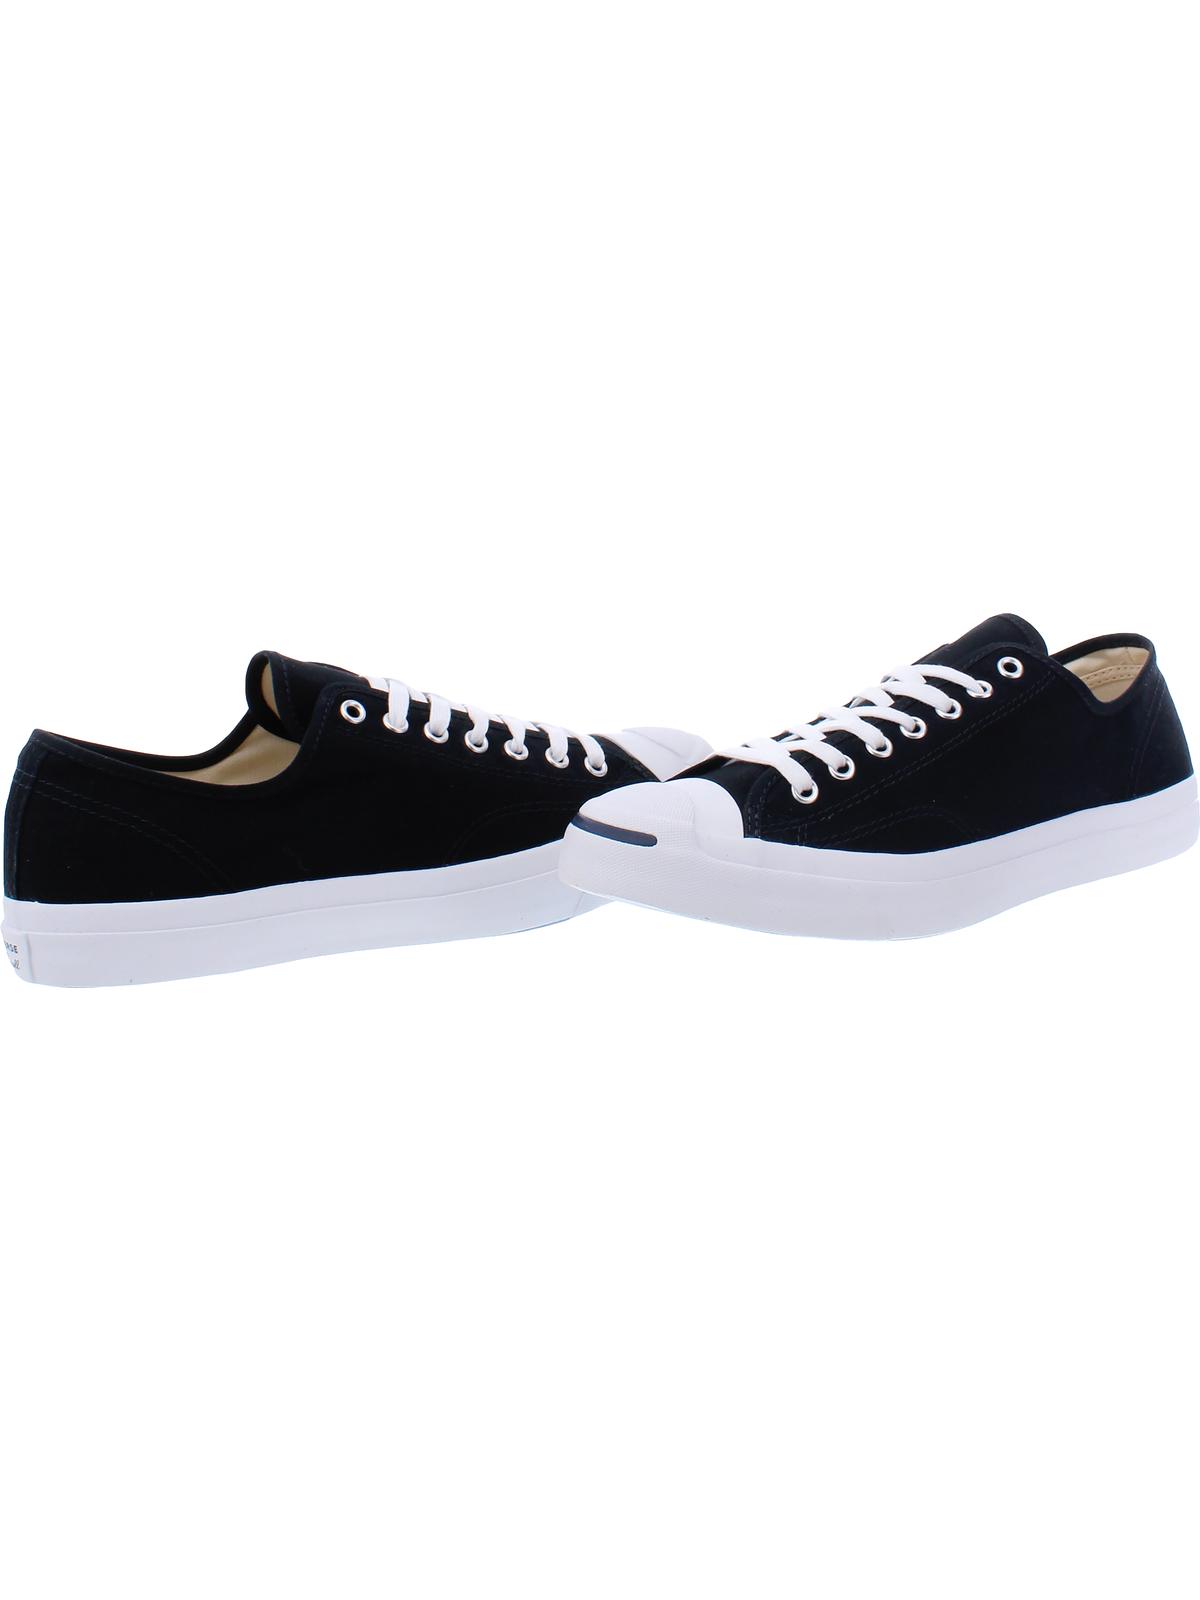 Converse Mens Jack Purcell Canvas Canvas Low Top Fashion Sneakers - image 3 of 3